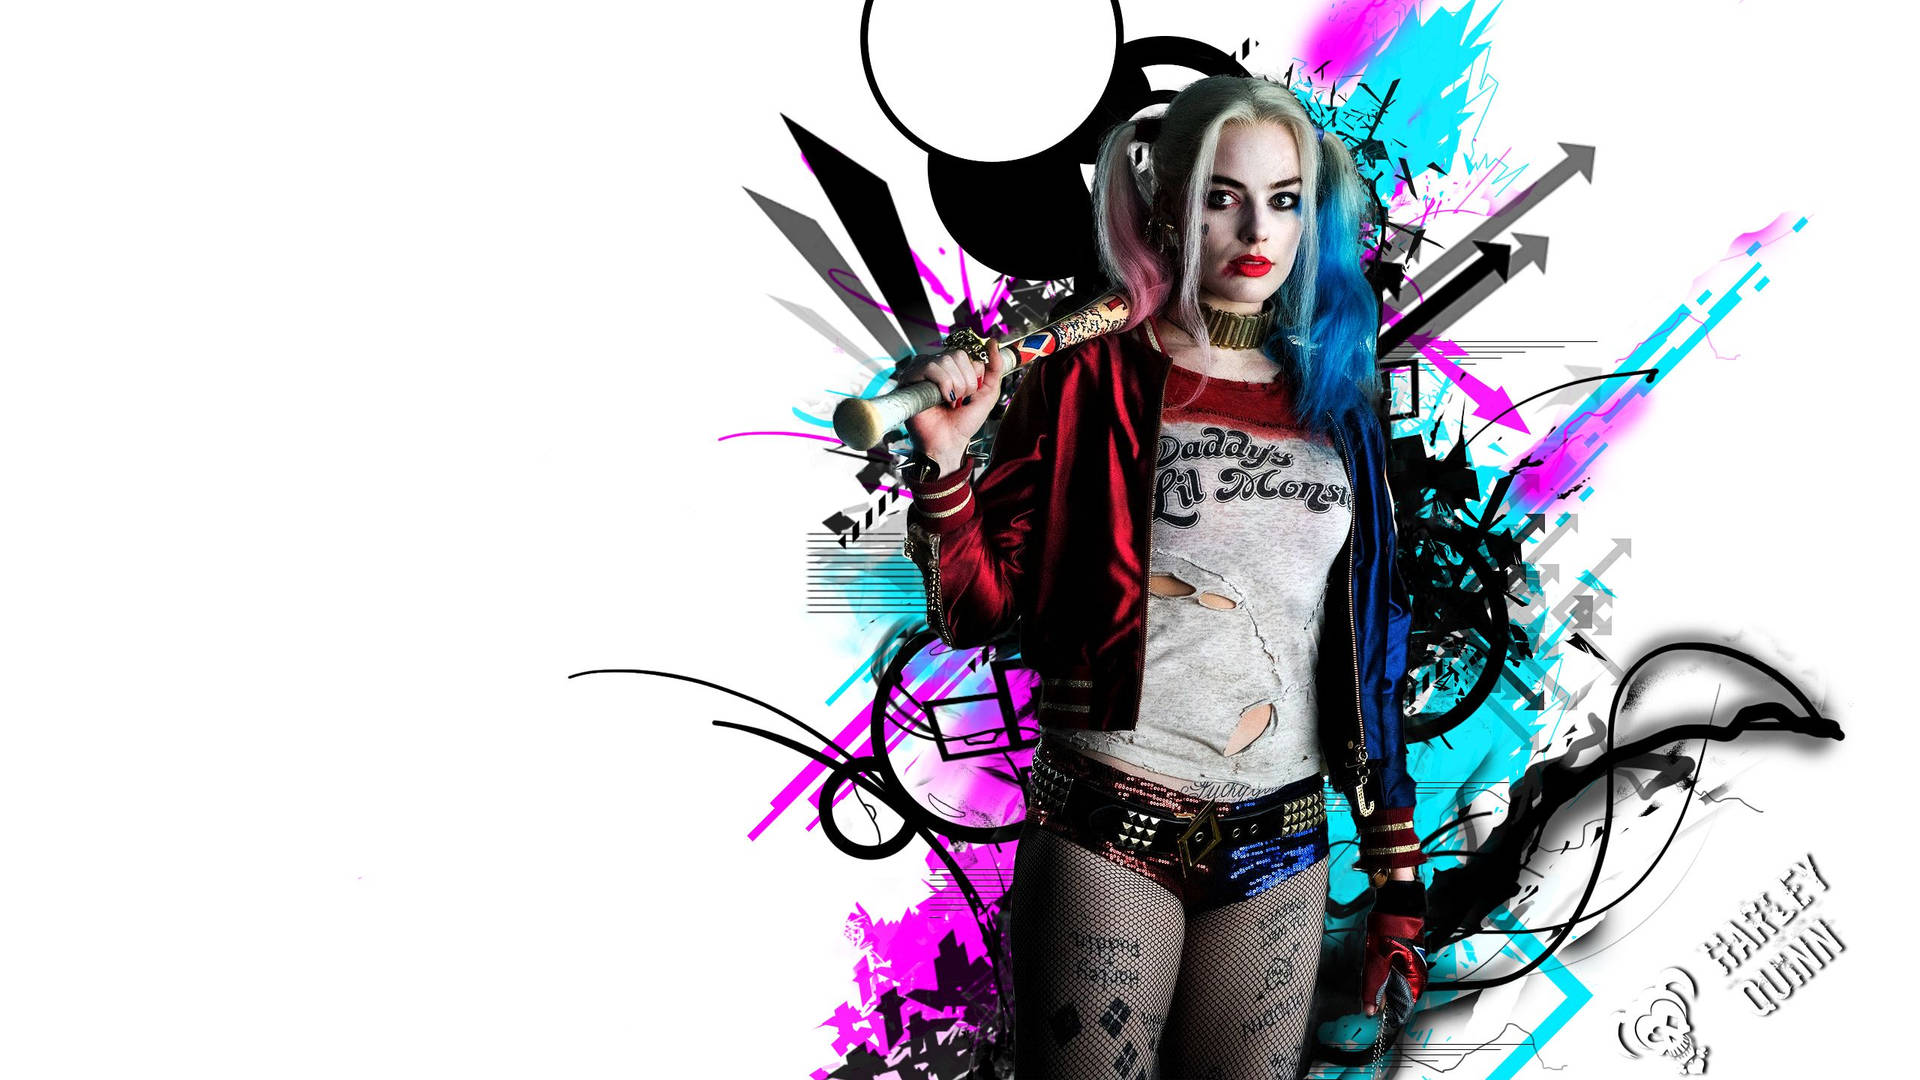 The iconic Harley Quinn with an evil smirk Wallpaper